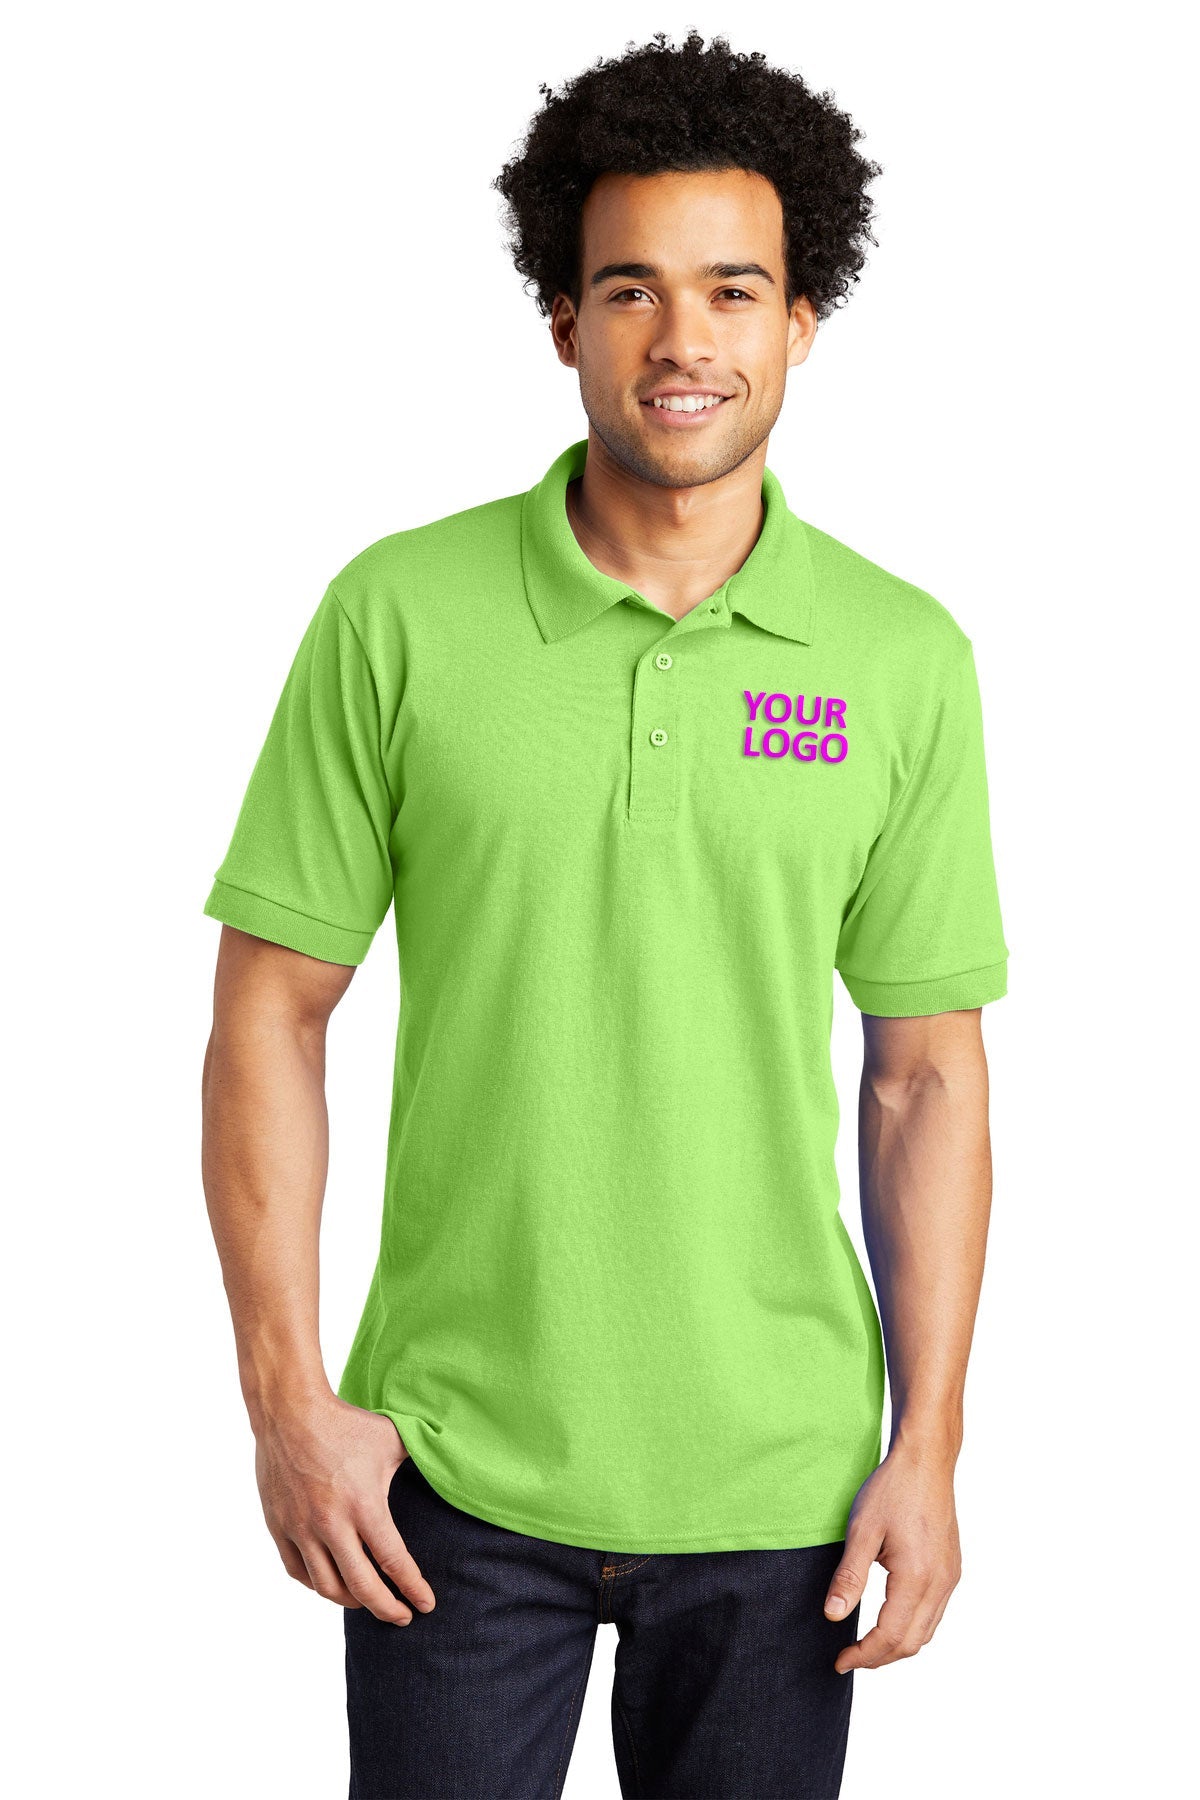 Port & Company Tall Core Blend Jersey Knit Polo KP55T Lime